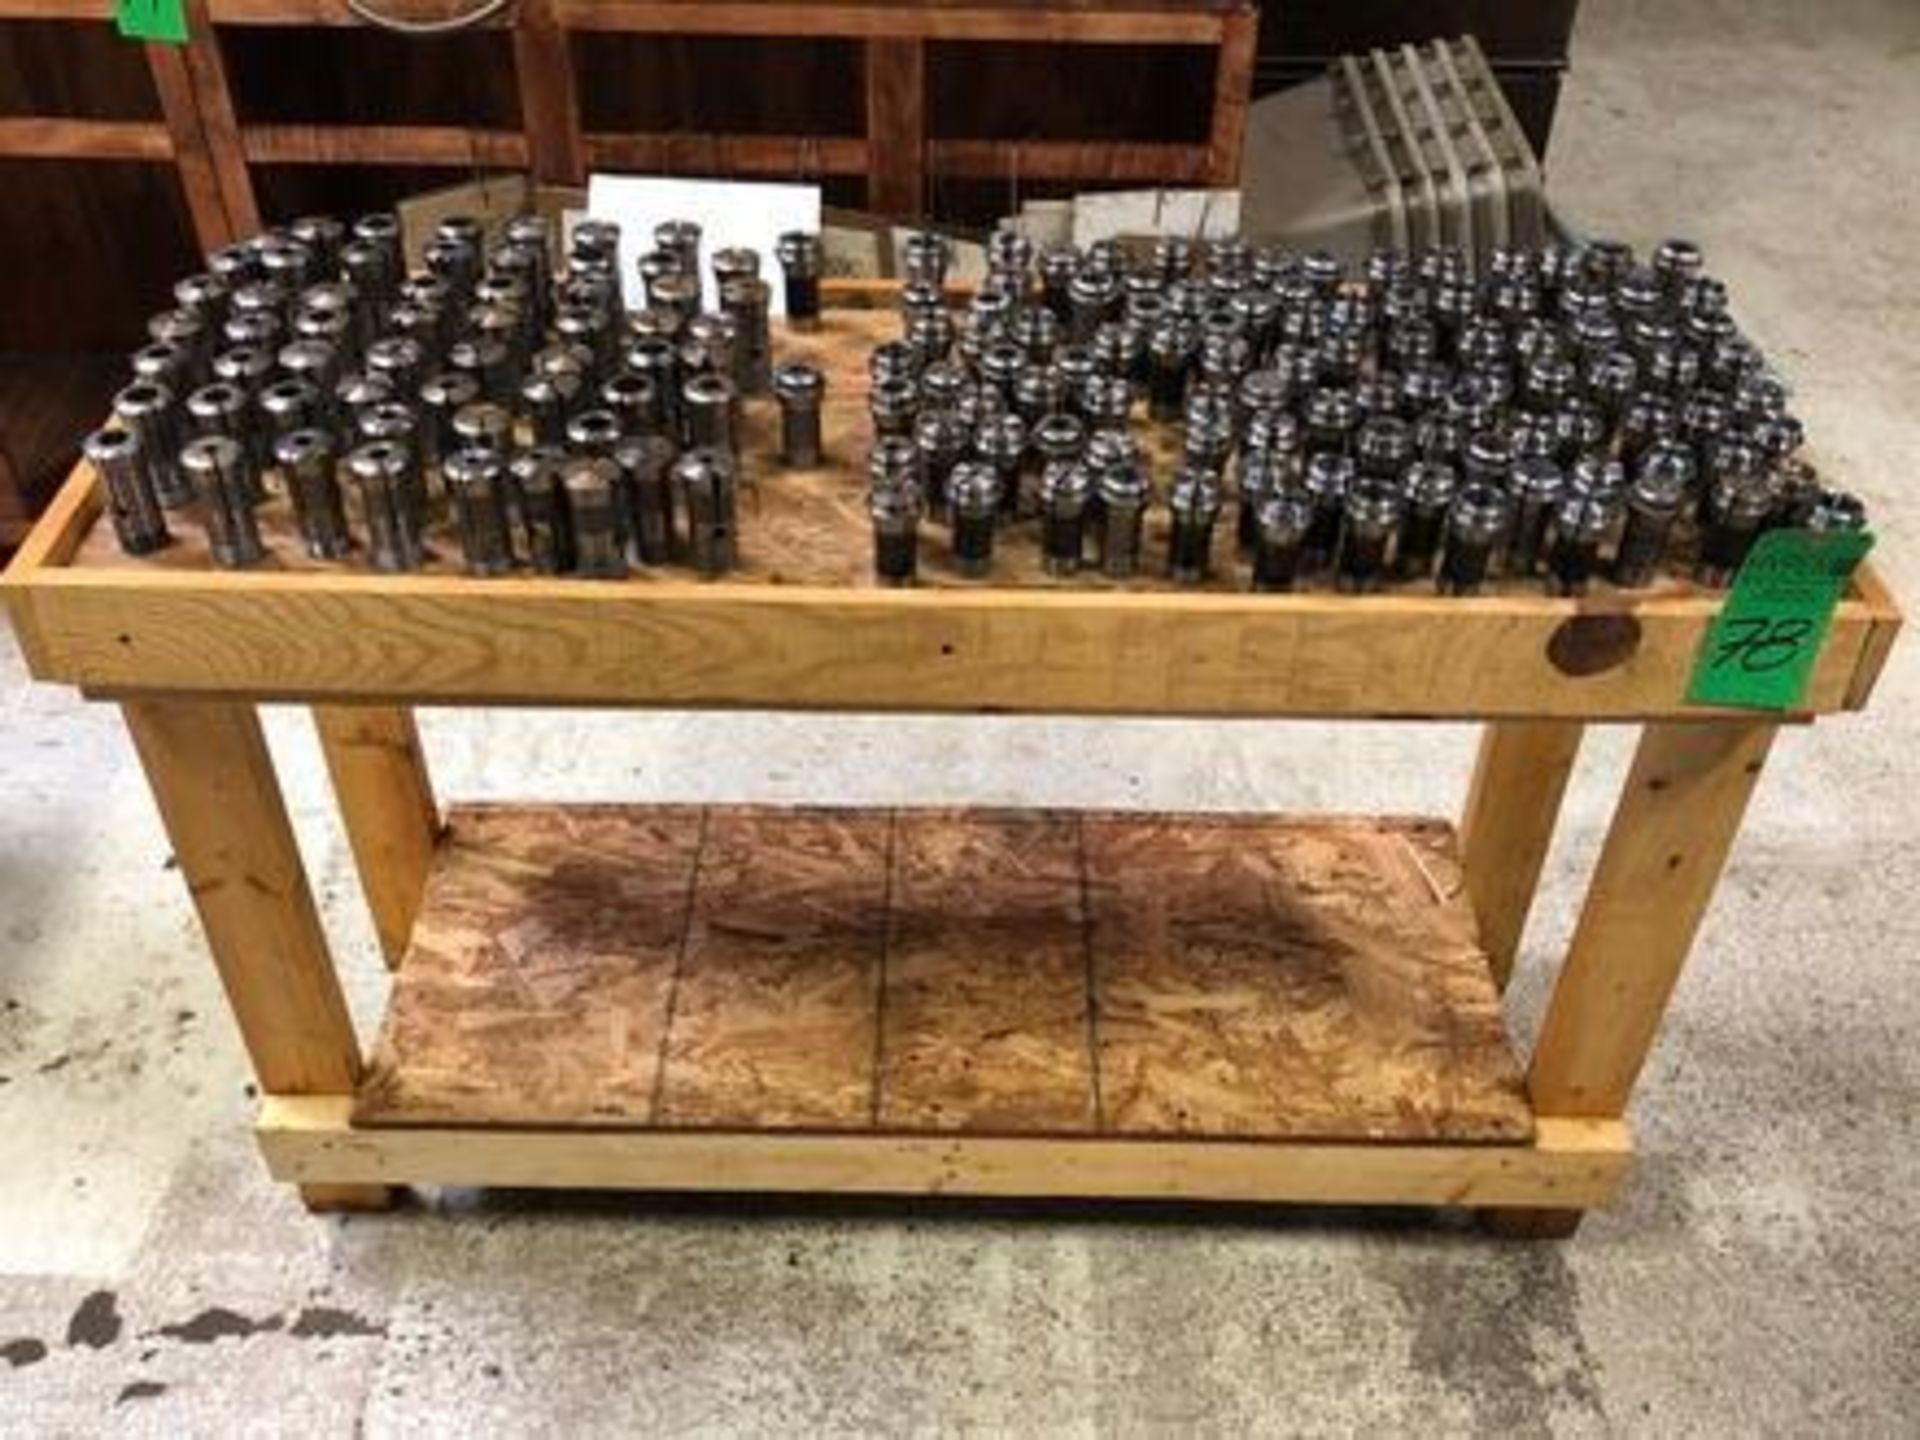 Guide Bushings for Hanwha XD32H CNC Screw Machine with wood table size 51" x 19" x 32".